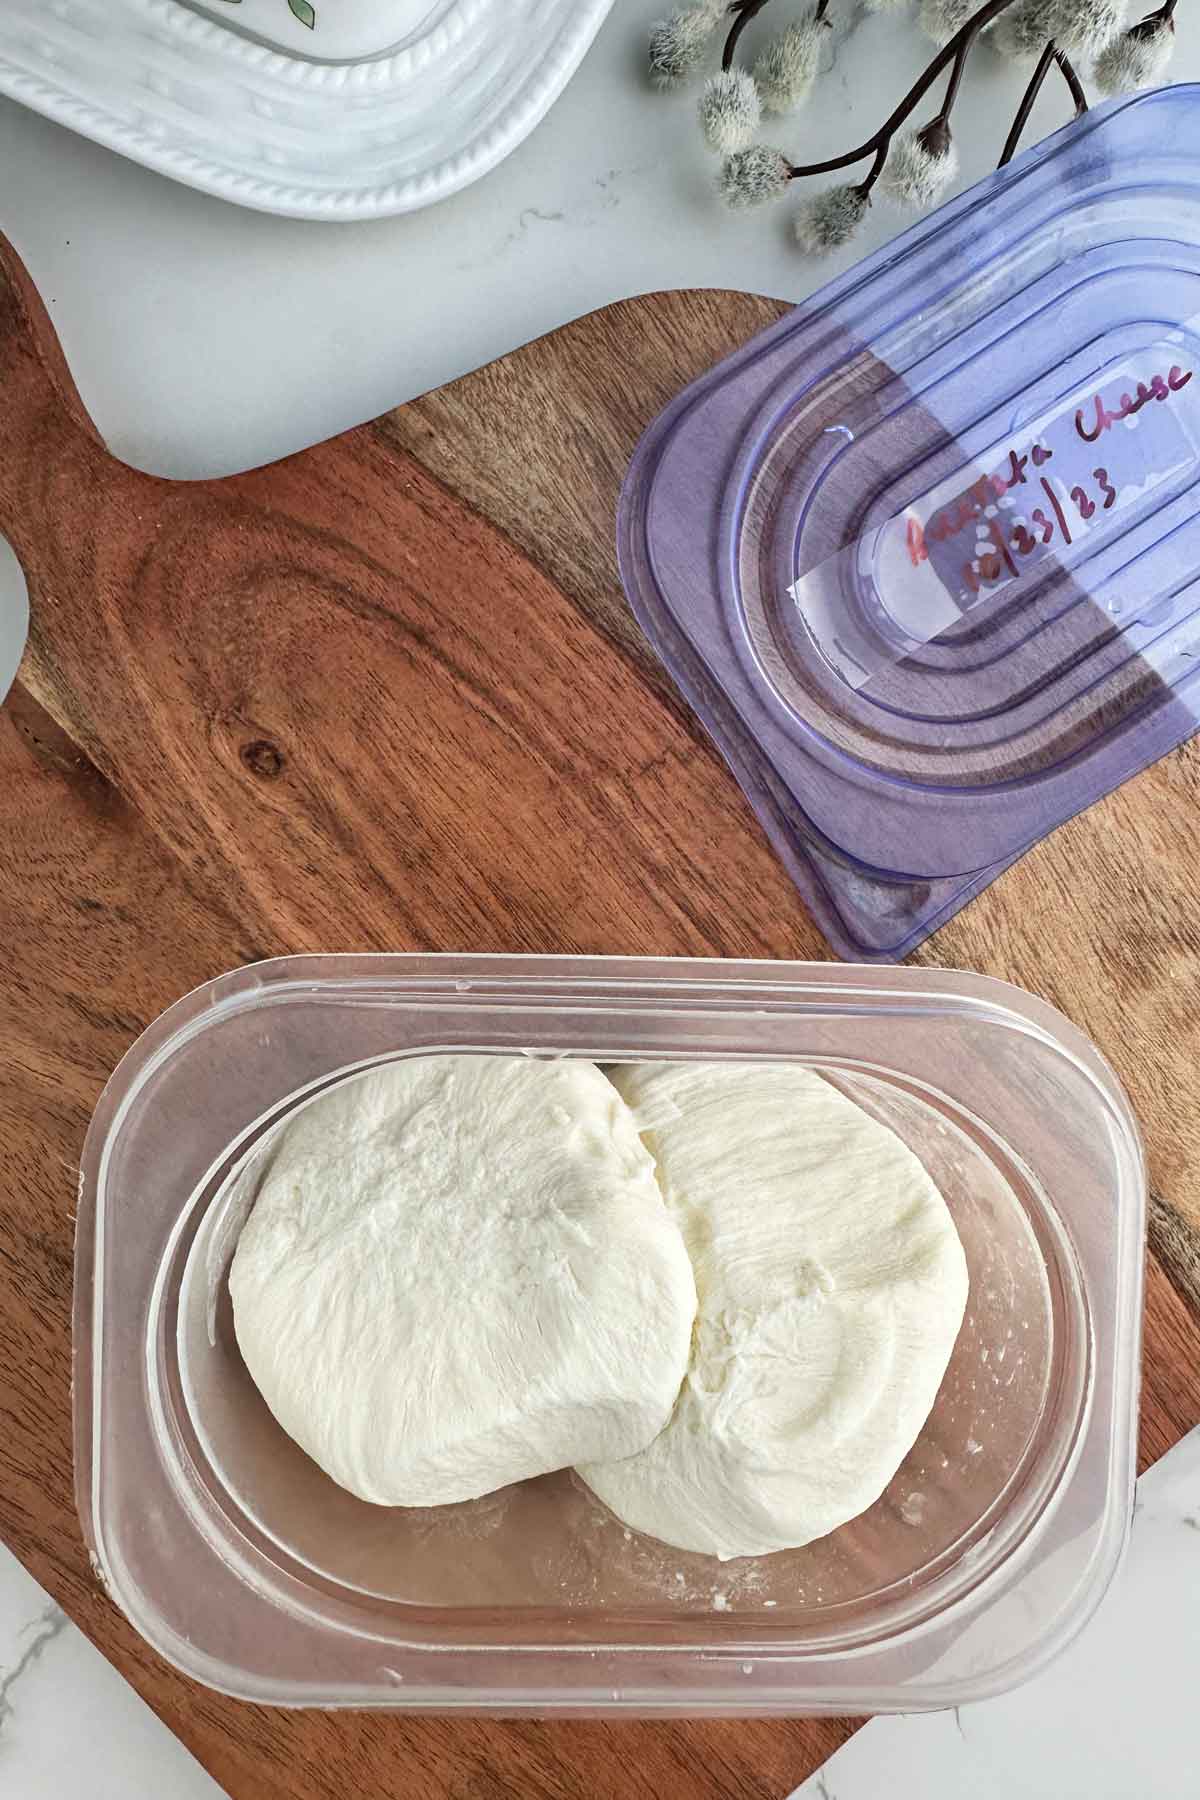 defrosted burrata cheese.